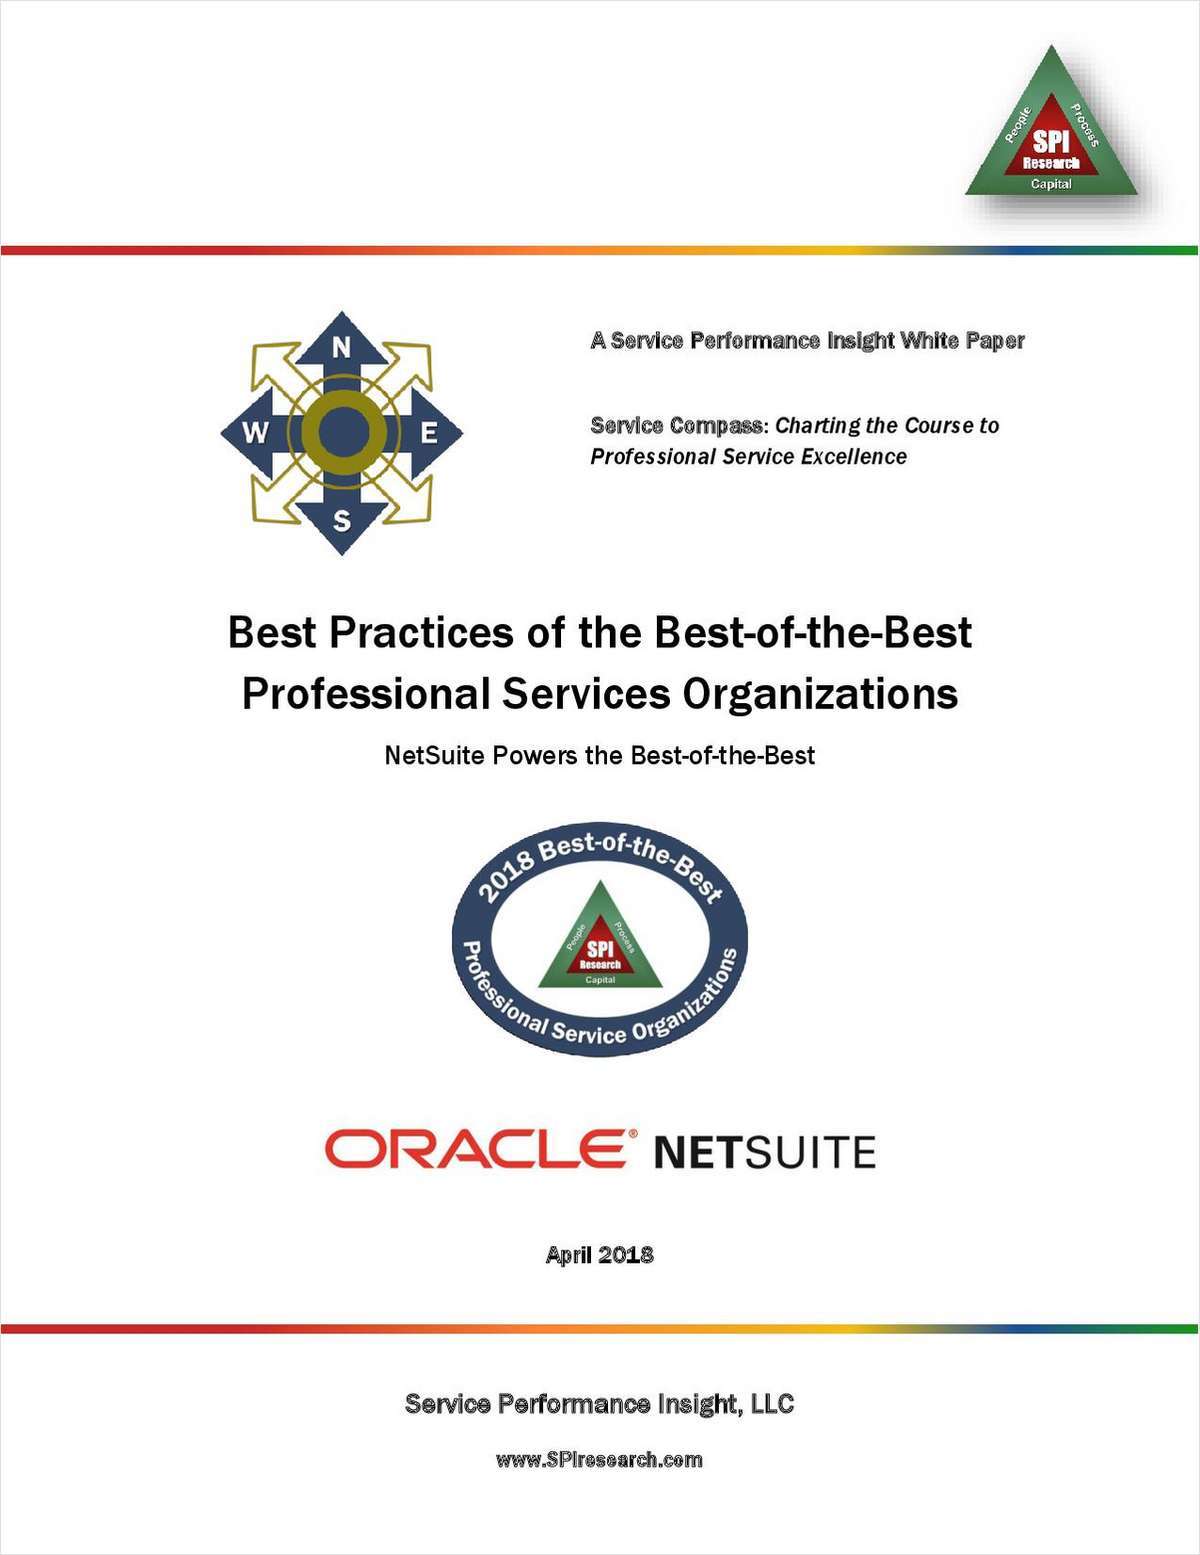 Best Practices of PS Organizations